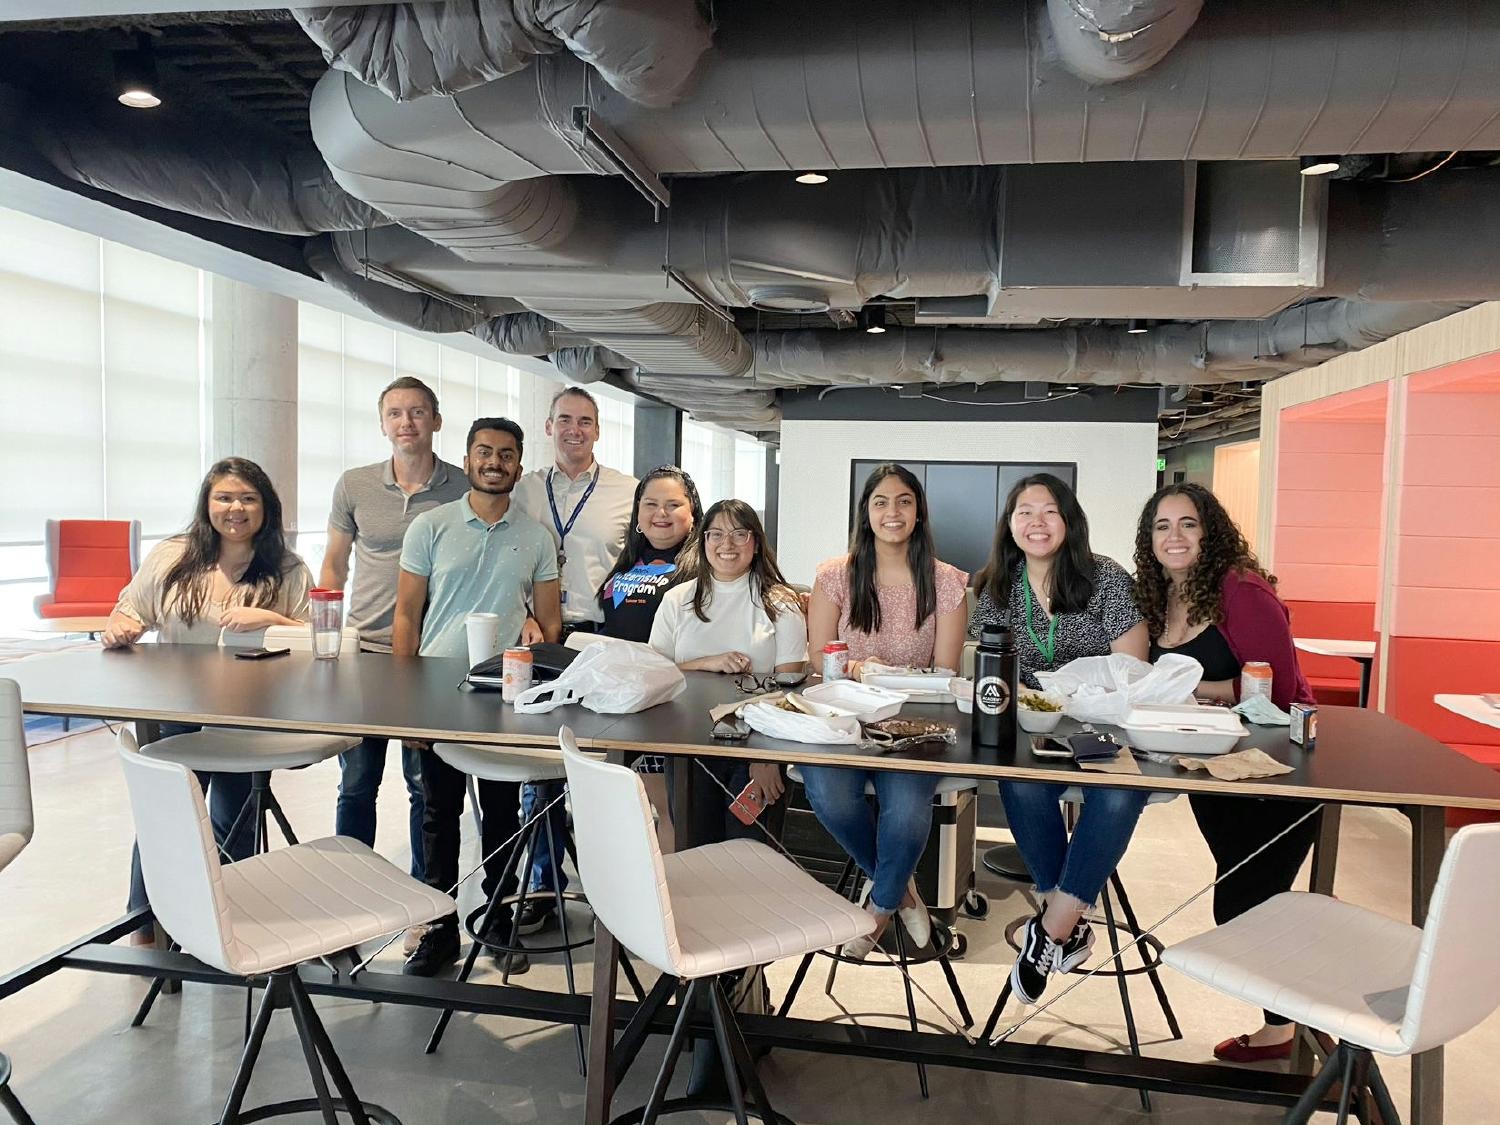 An on-site social for our summer interns—bringing together a few of our 21 students taking part in the virtual program.